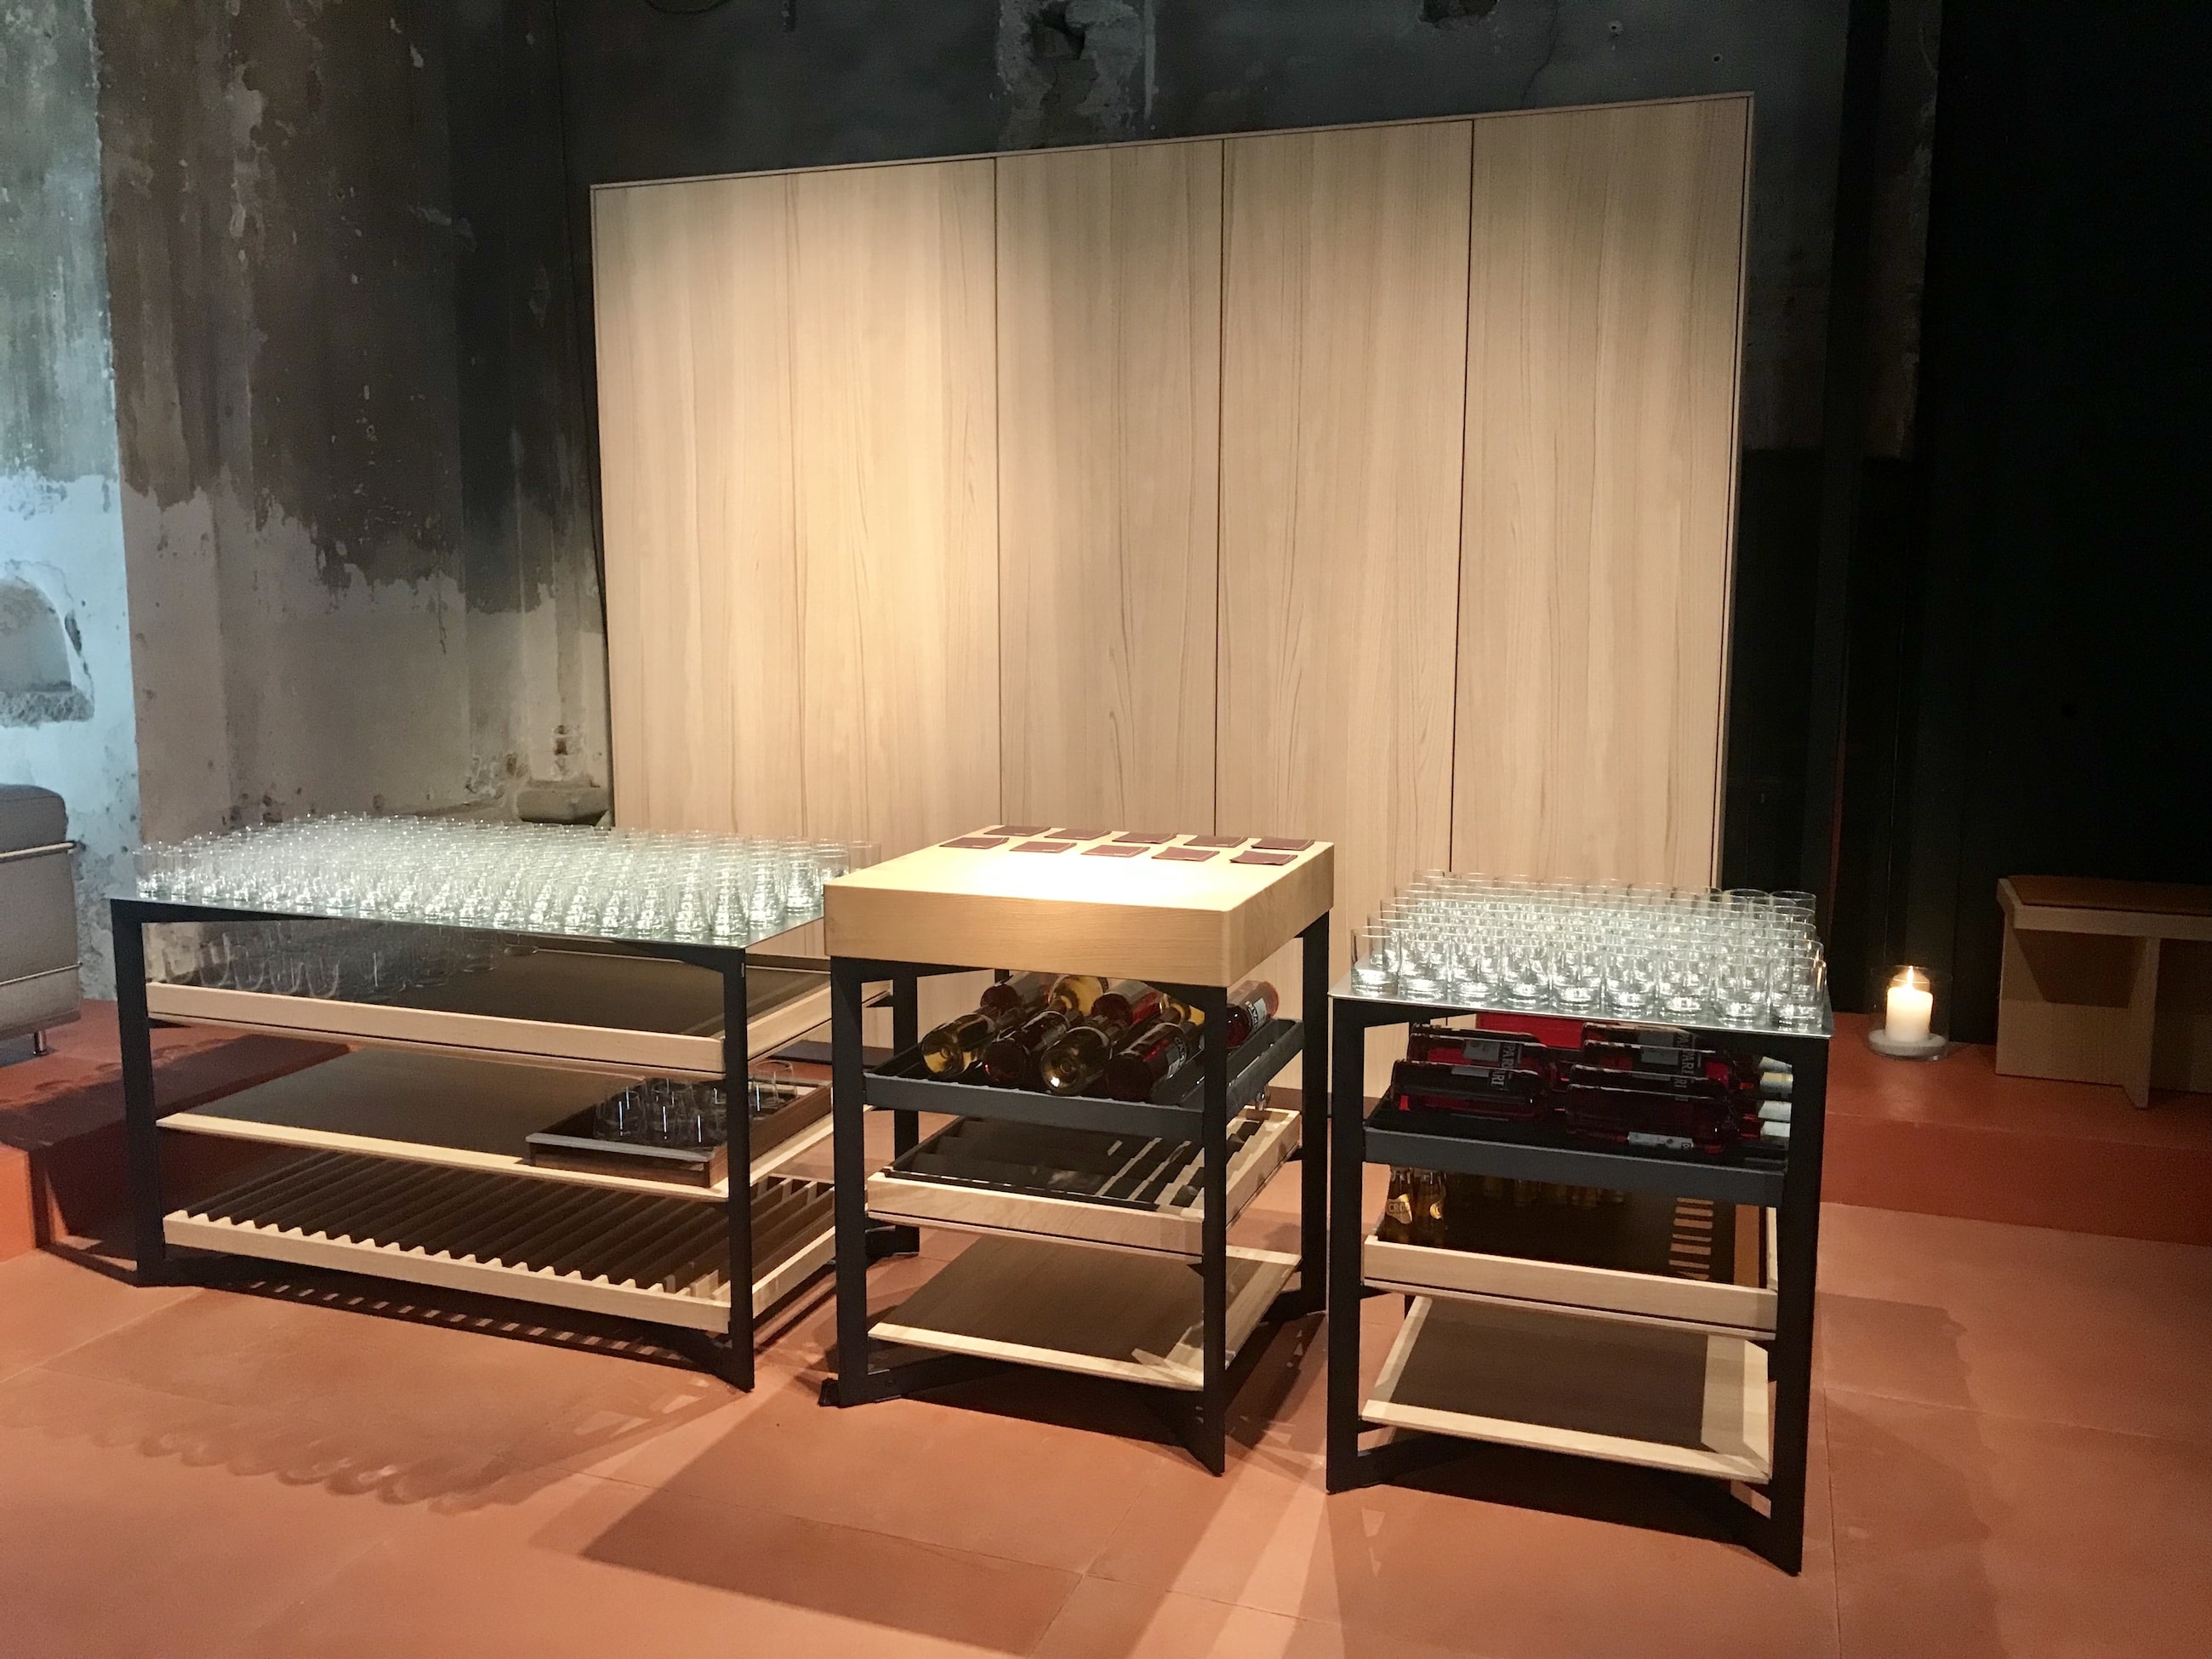 Presence of bulthaup at the Salone del Mobile in Milan 2018